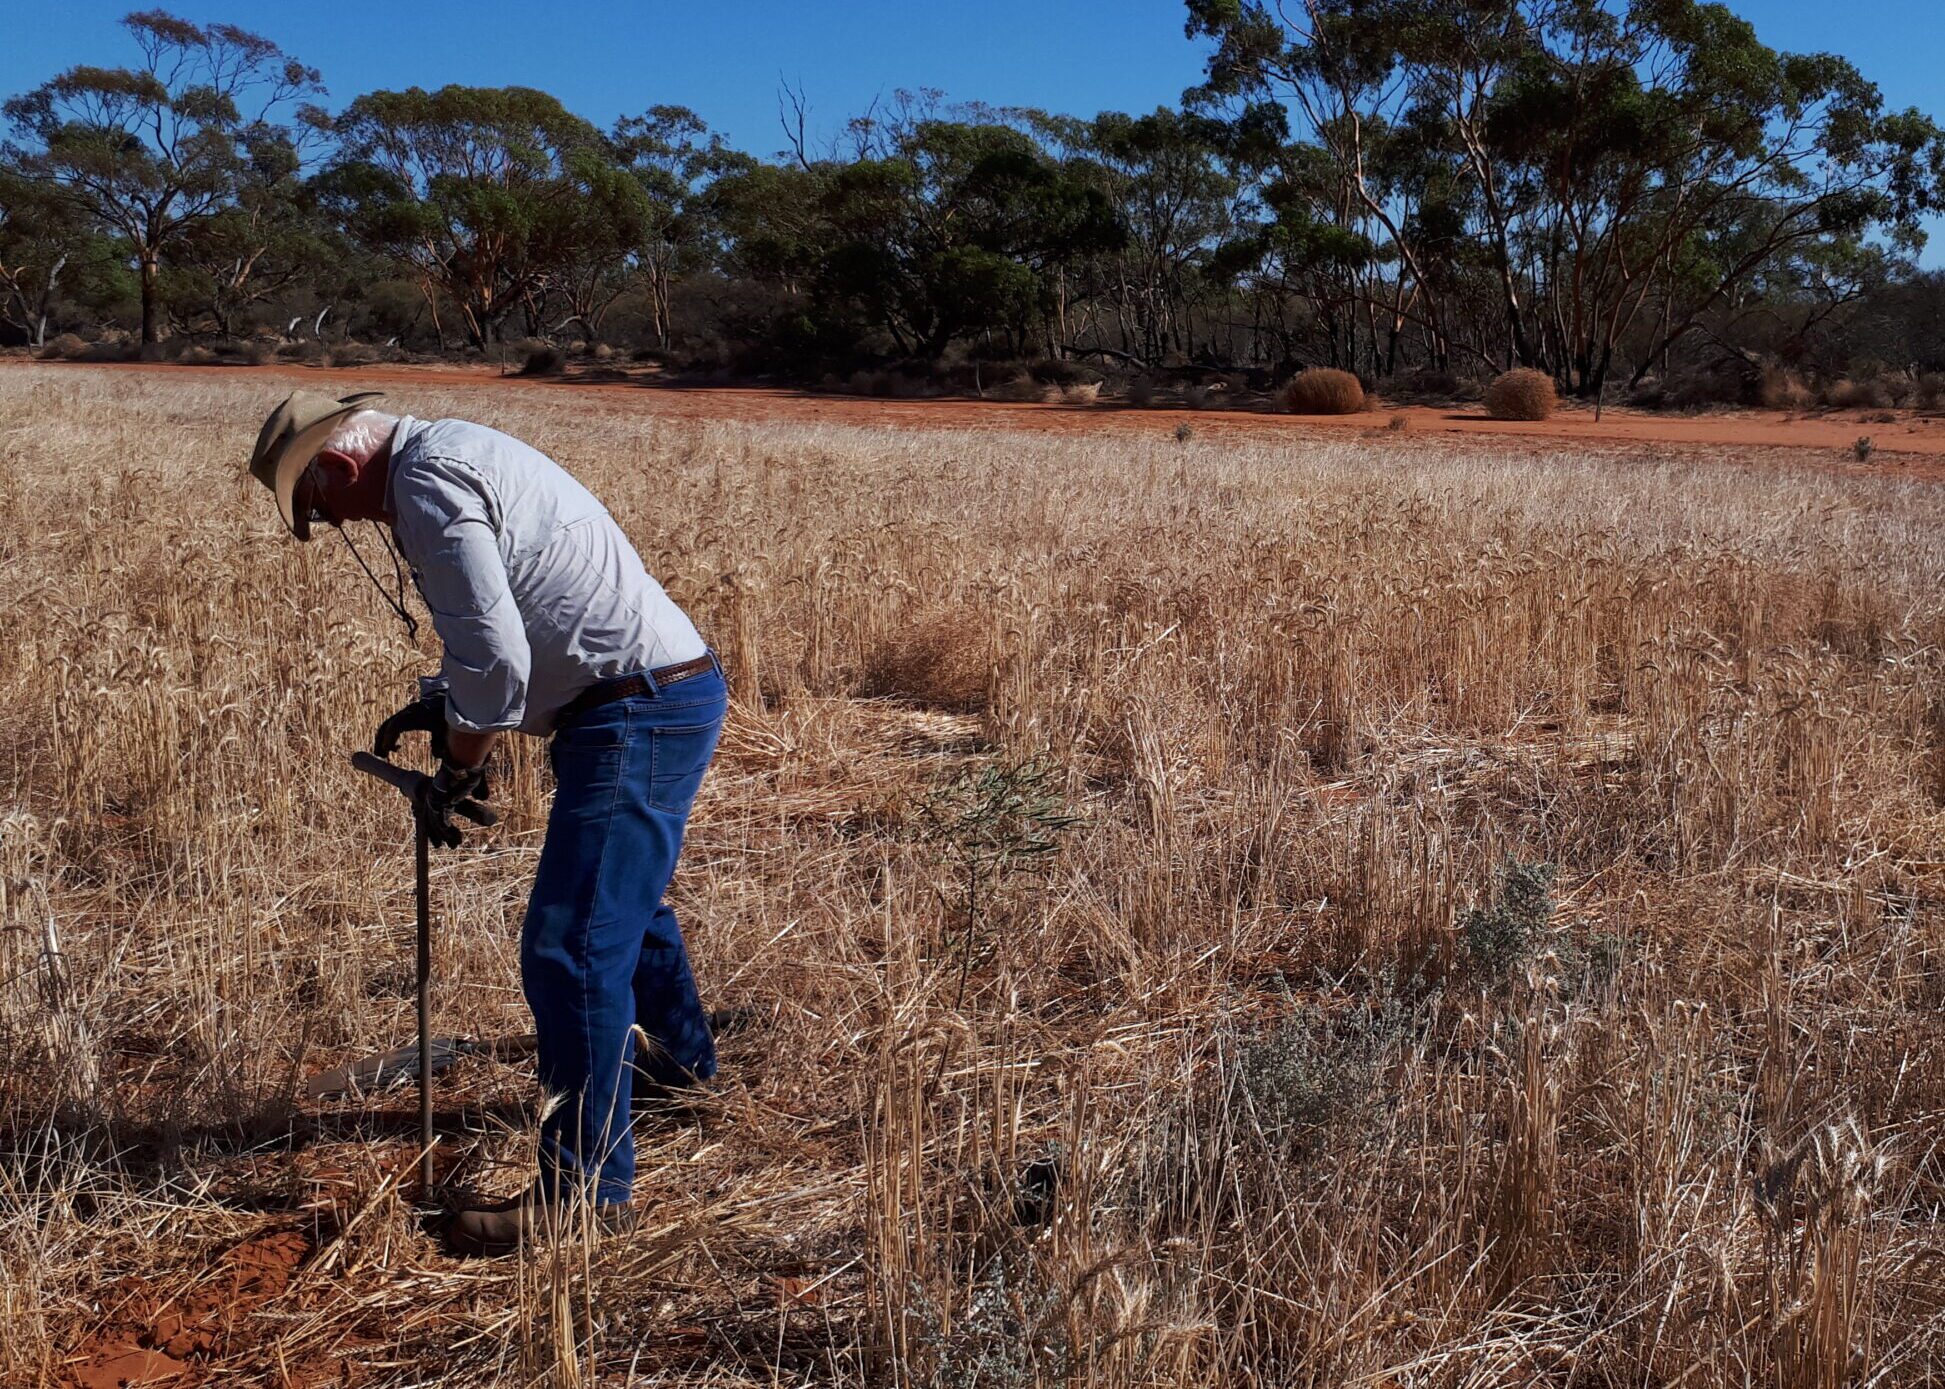 Man in long sleeved shirt and hat leaning over pole in the ground with dry crops to the right of him.